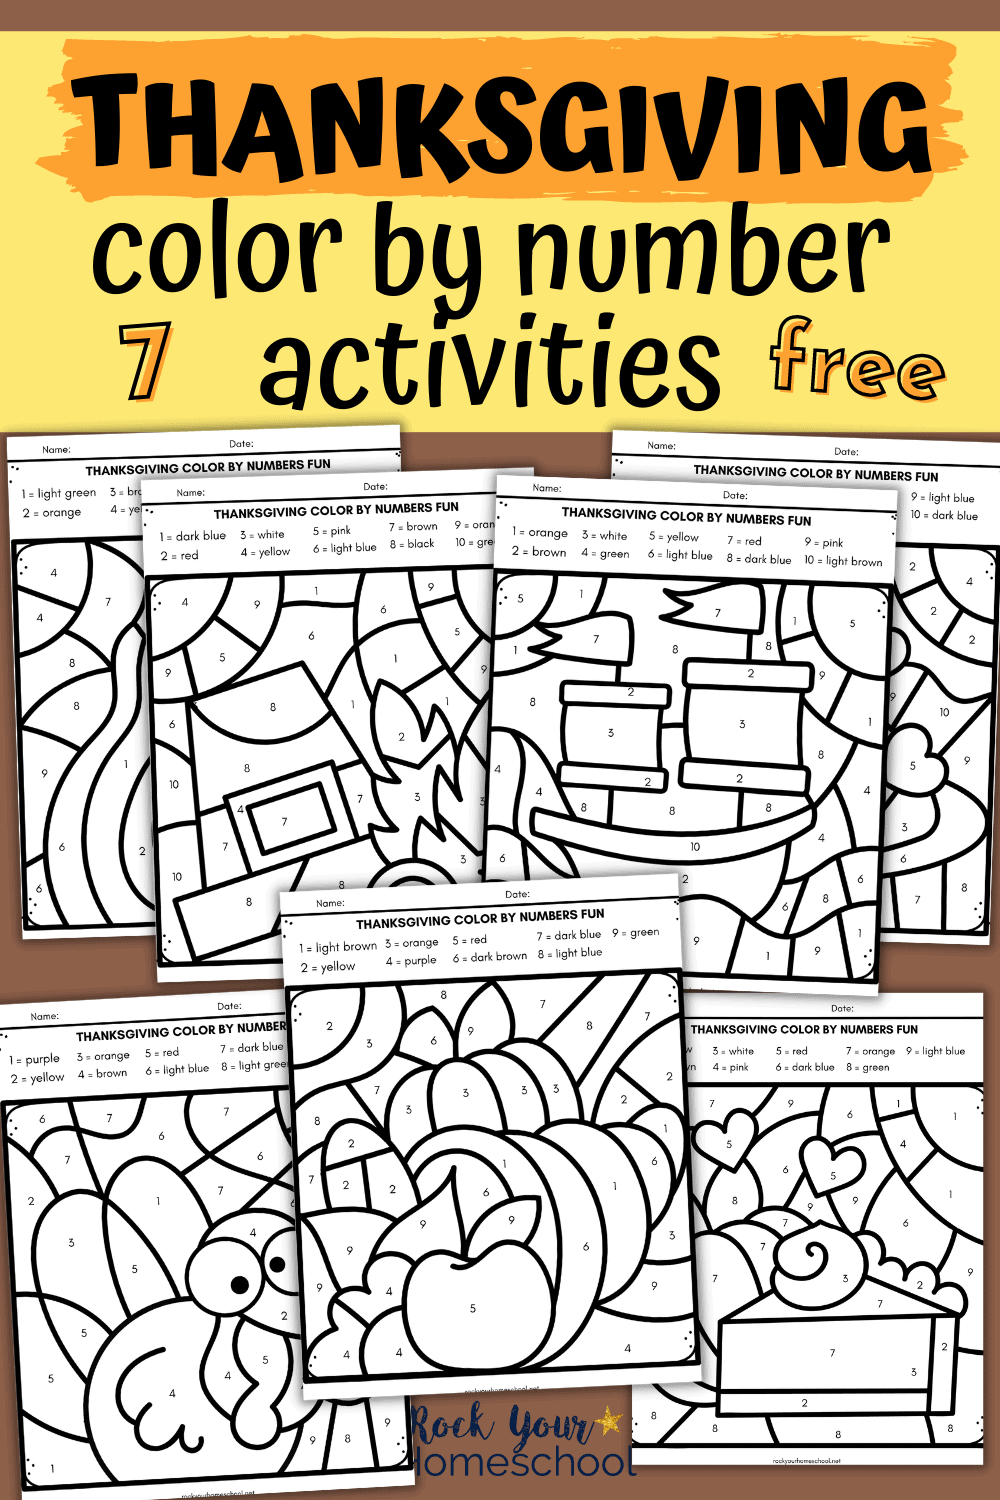 Free Thanksgiving Color by Number Printables Pack for Simple Holiday Fun